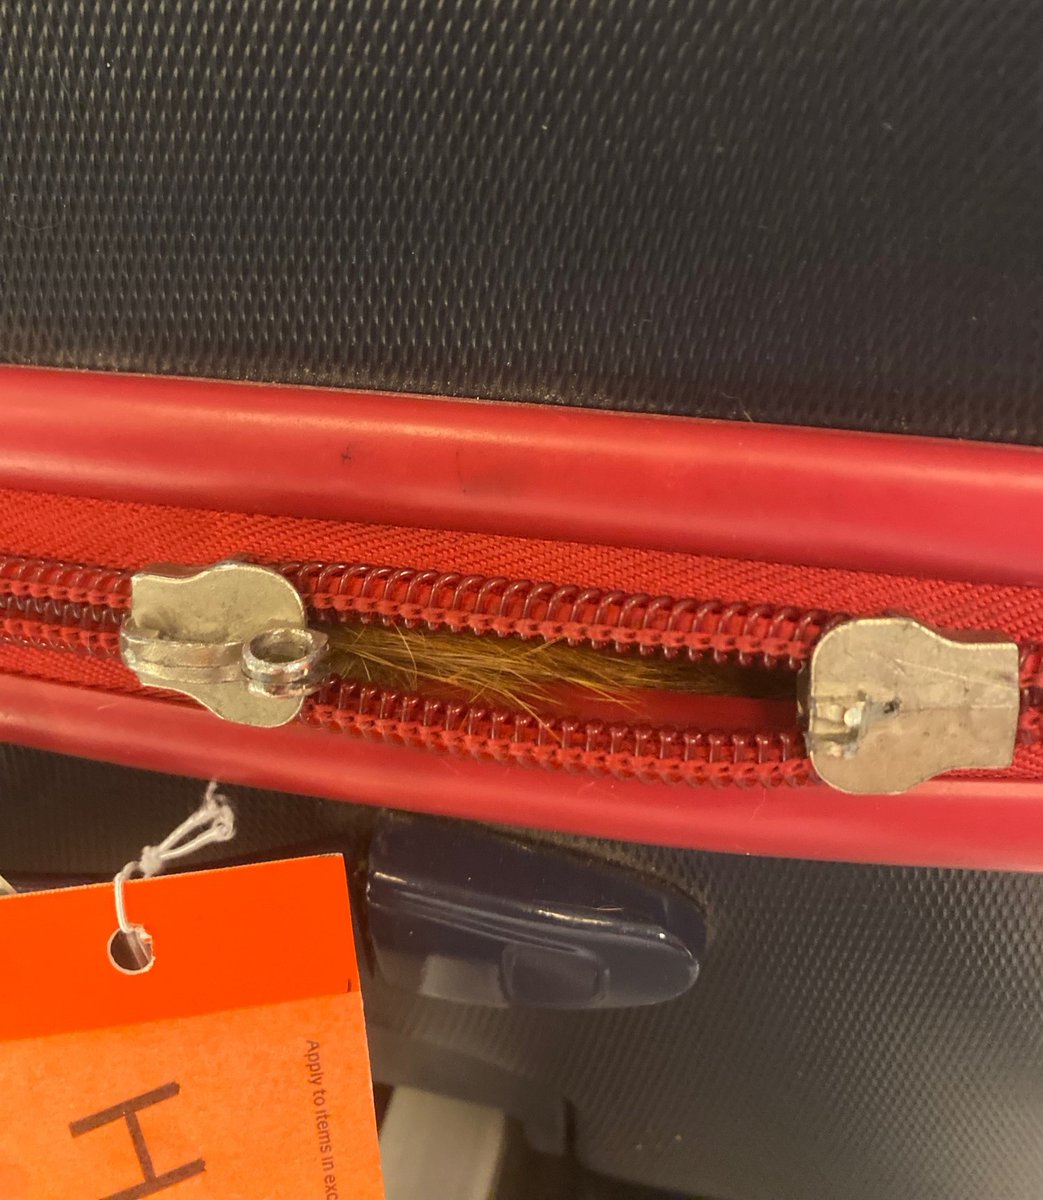 A @TSA officer was shocked to find an orange cat inside a checked bag at @JFKairport after it went through the X-ray unit. Traveler said the cat belonged to someone else in his household. On the bright side, the cat’s out of the bag and safely back home.